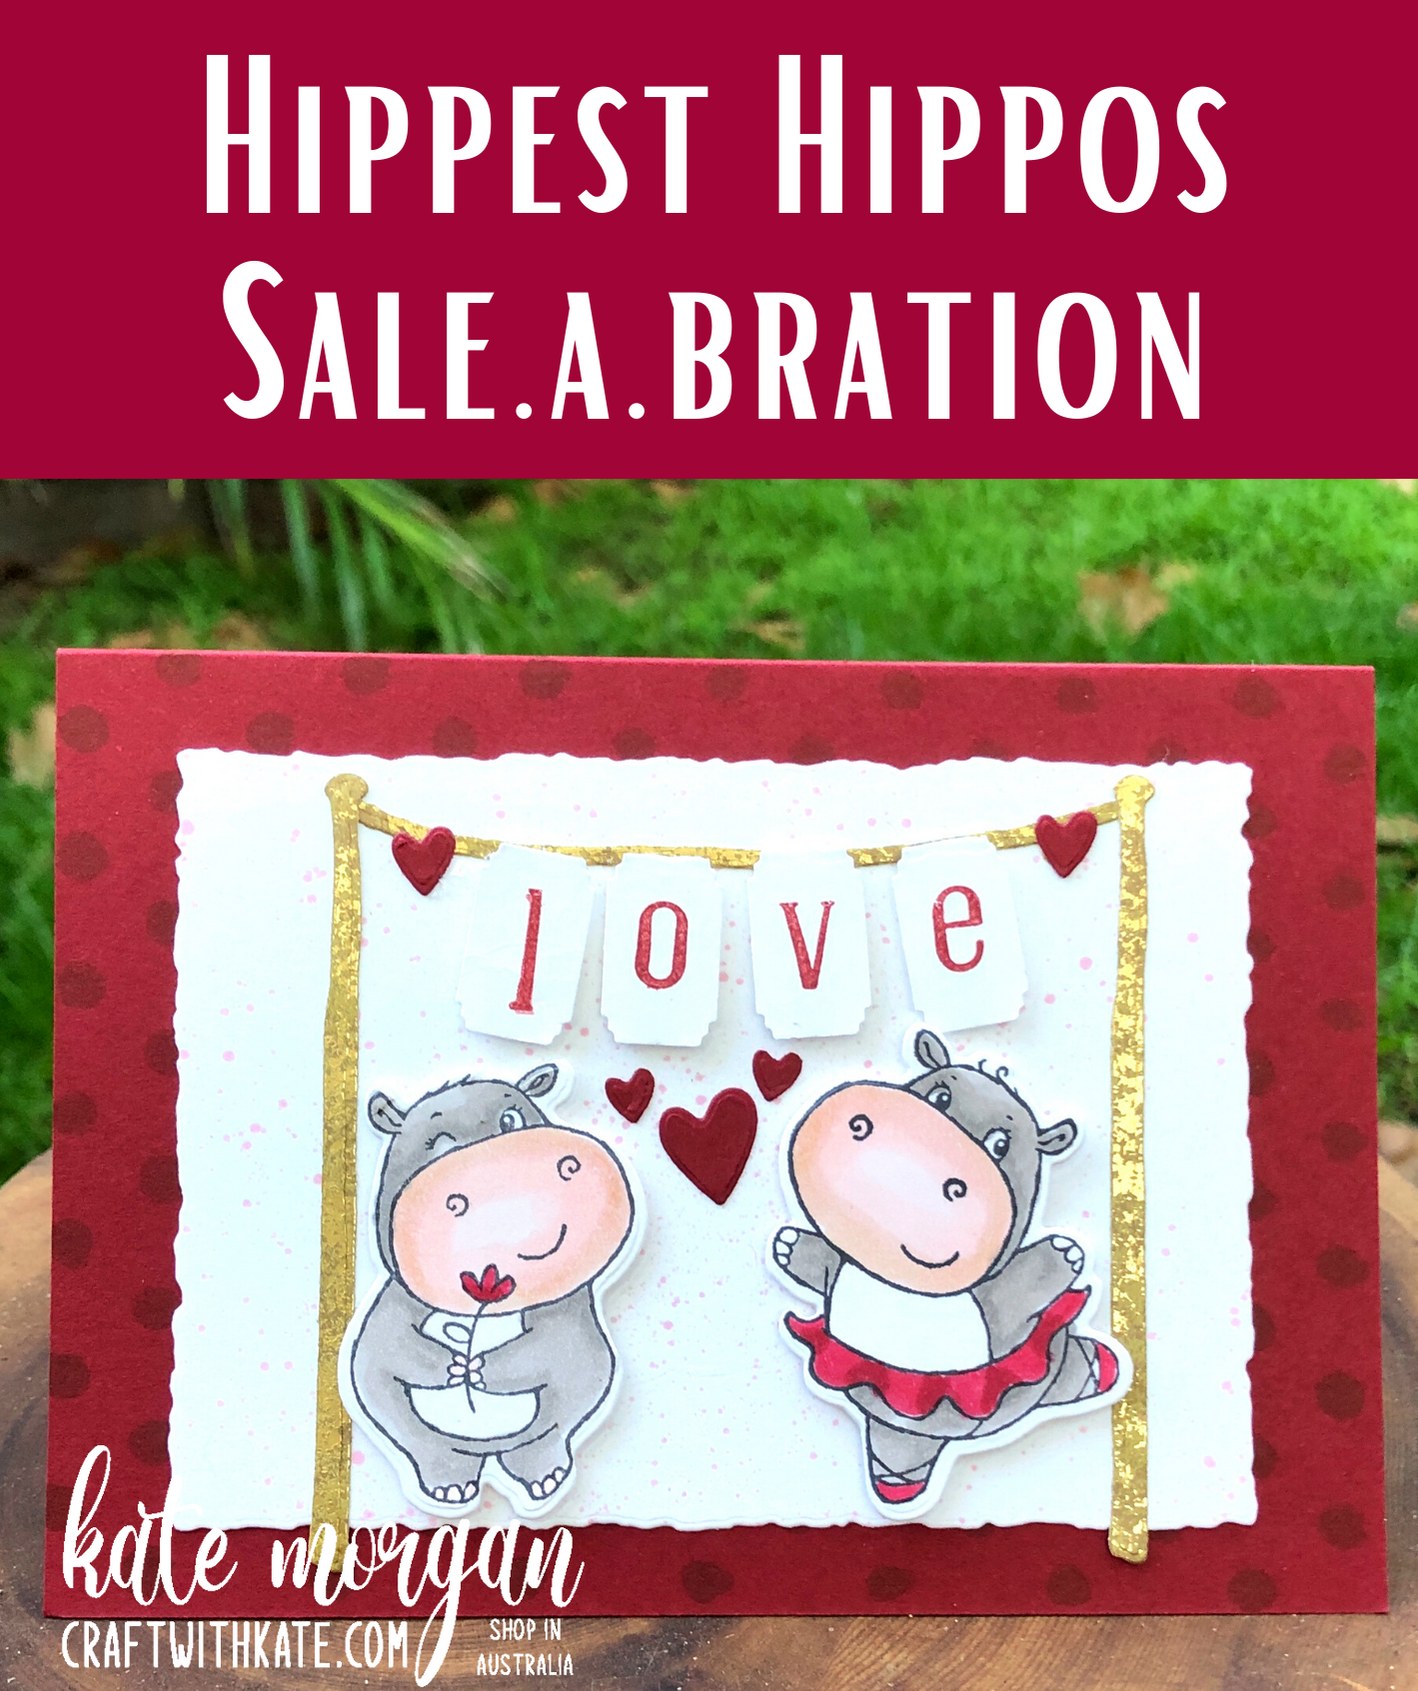 Hippest Hippos Saleabration card by Kate Morgan, Stampin Up Australia, Heart of Christmas 2022